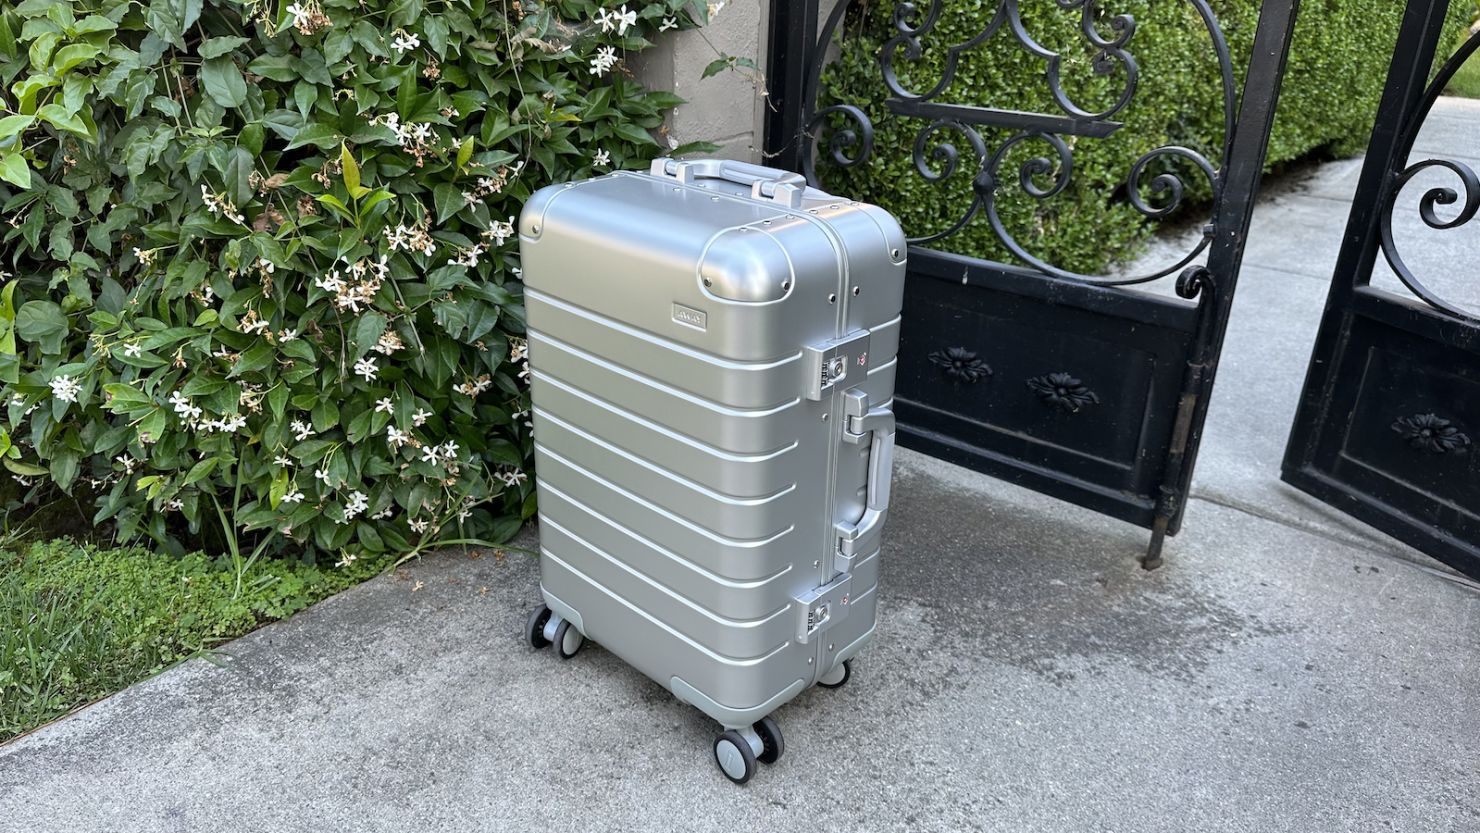 The Innovative Luggage You Should Purchase Now